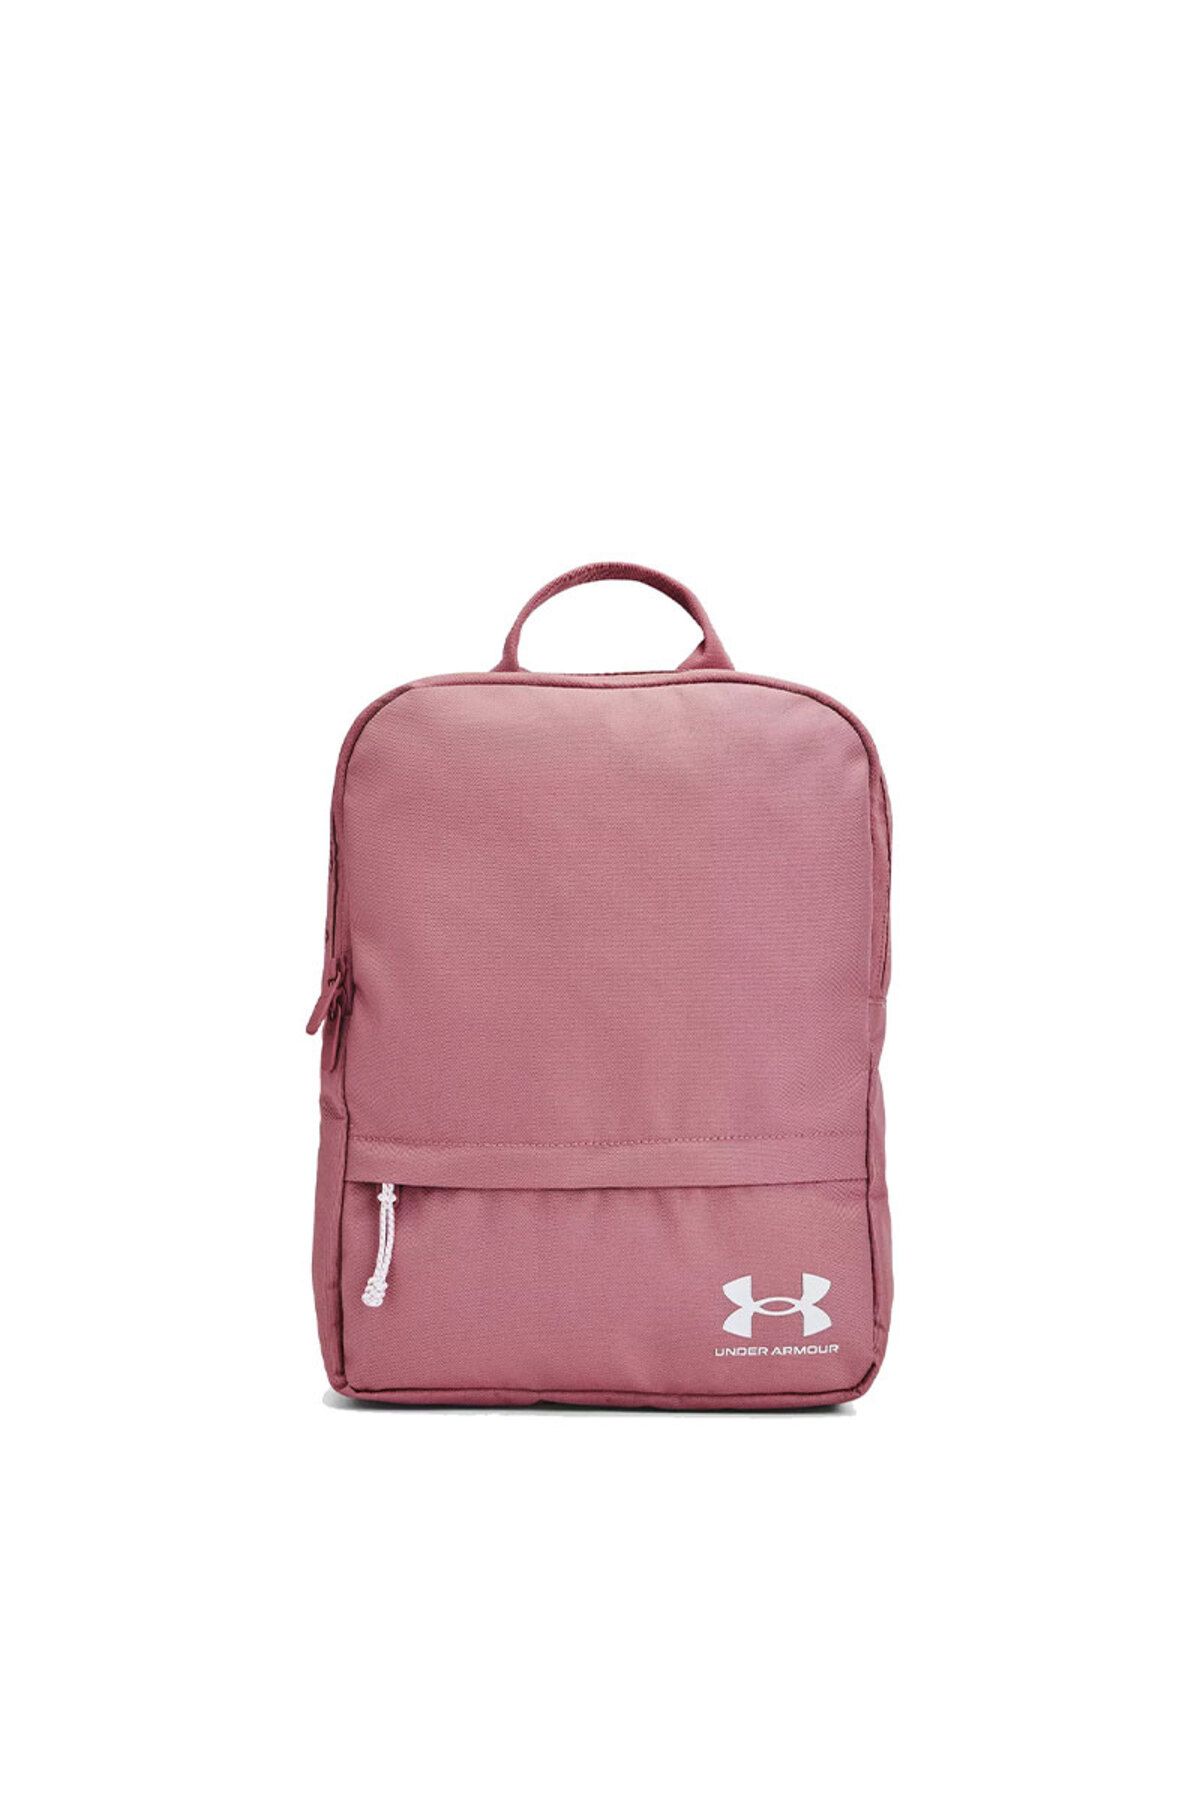 Under Armour Ua Loudon Backpack SM